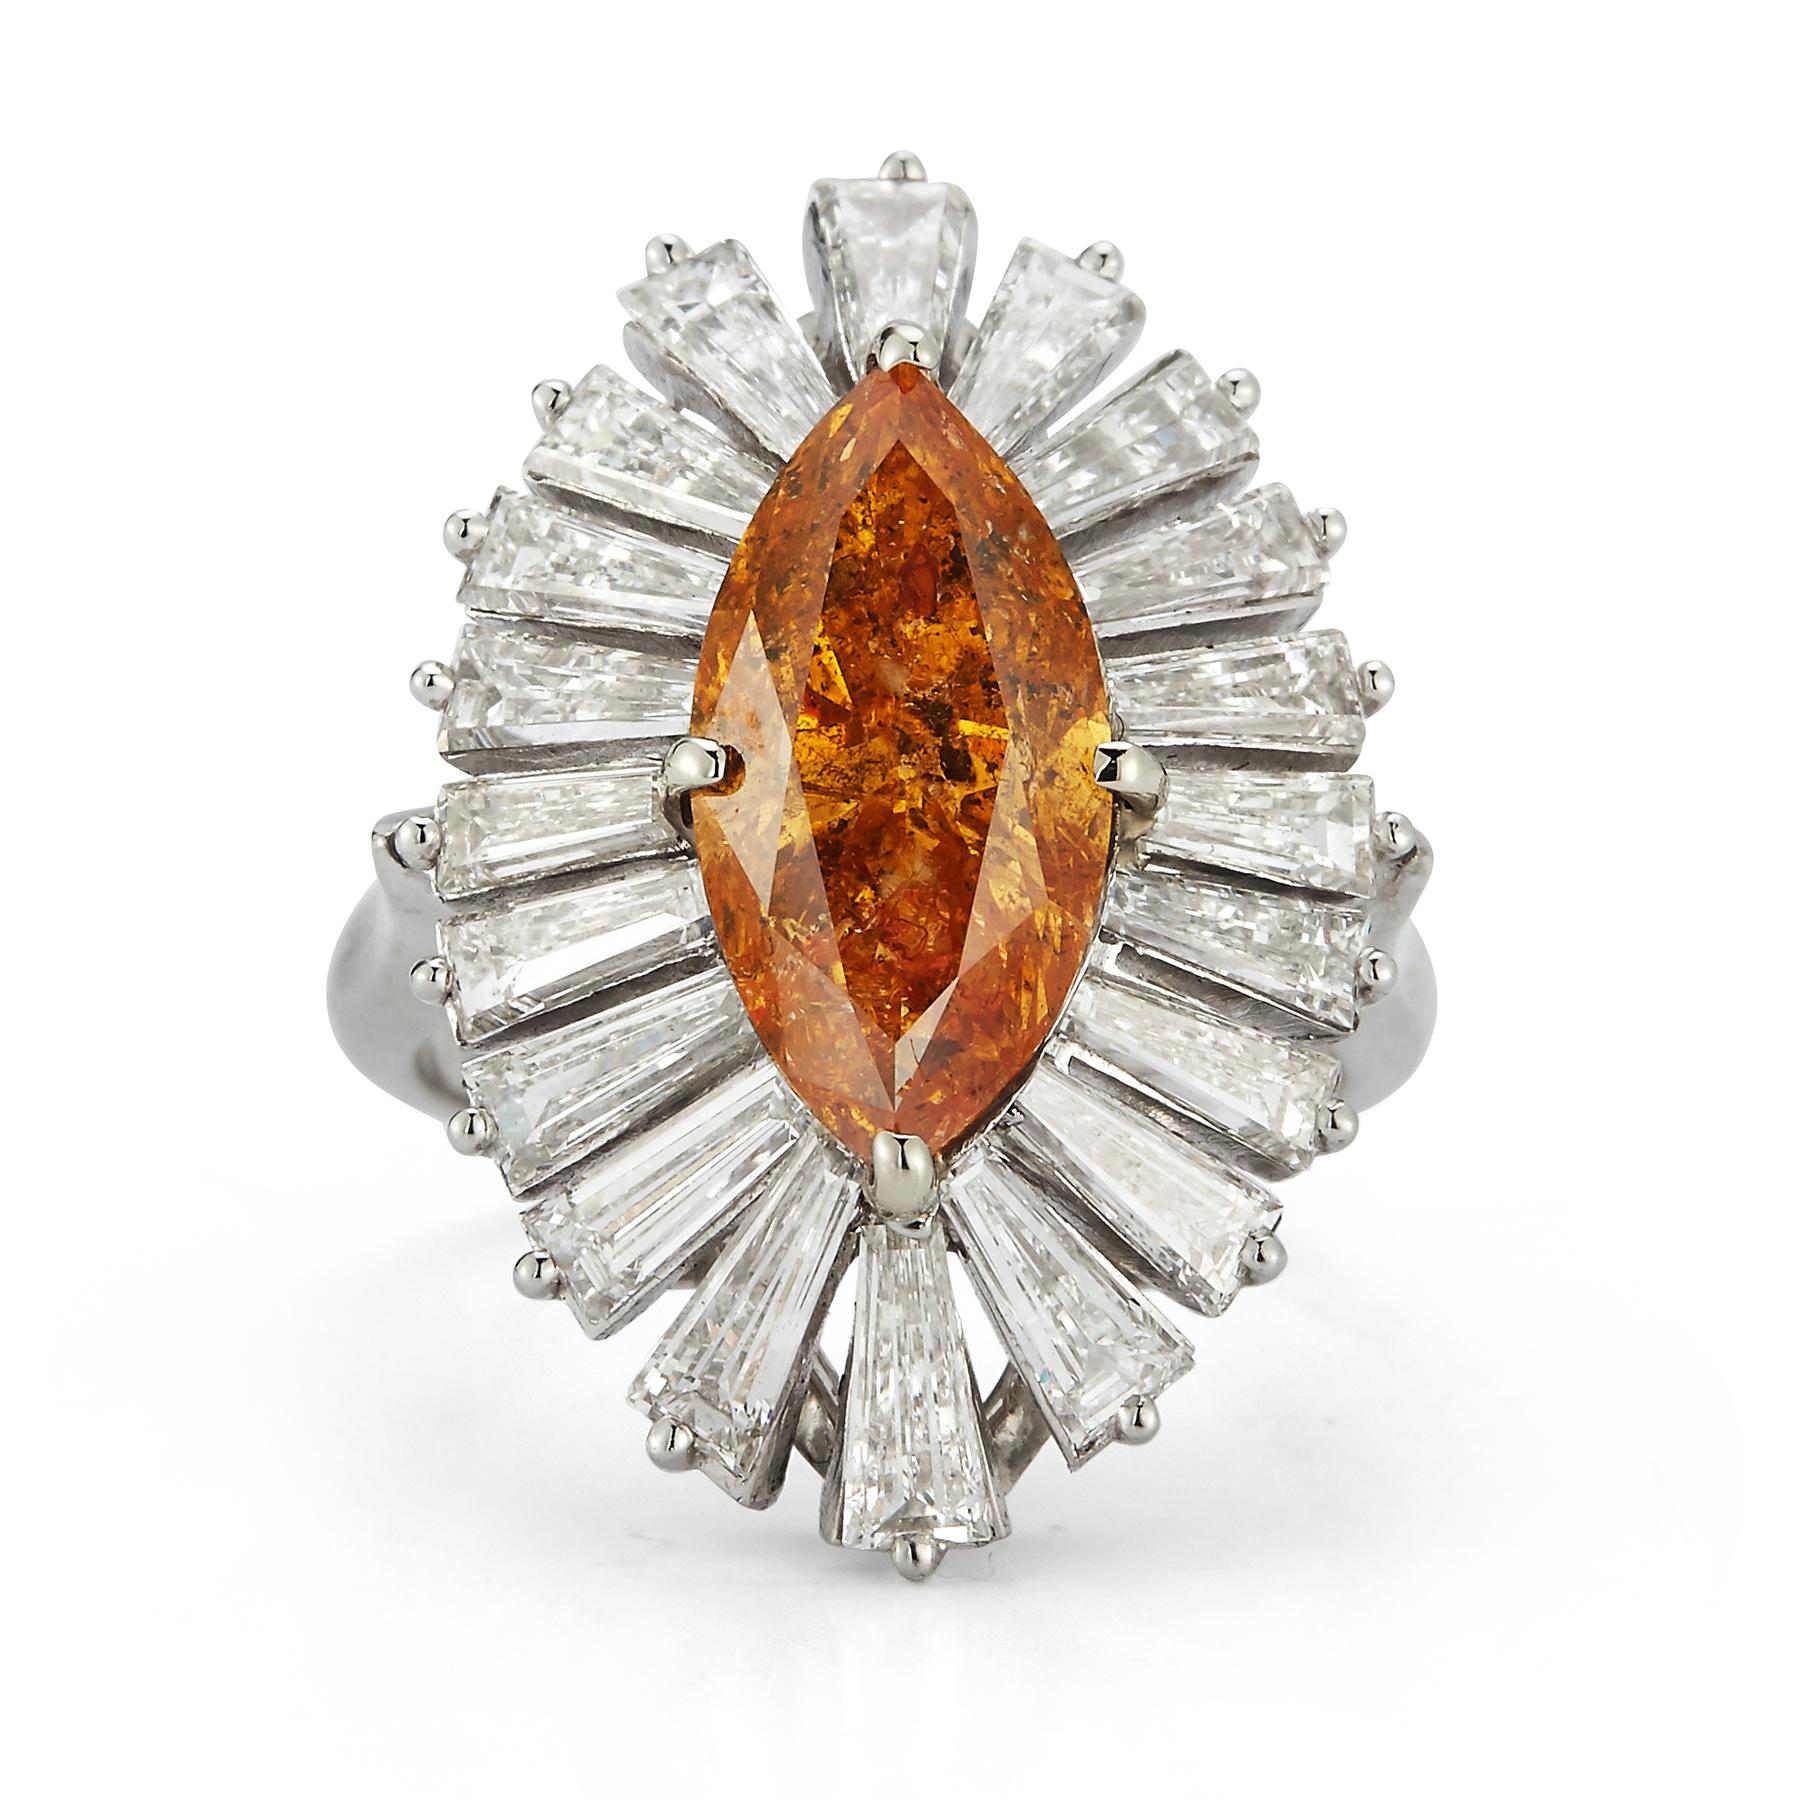 GIA Certified Fancy Deep Orange Yellow  Marquise & Baguette Cut Diamond Ballerina Ring  

3.20 carat marquise cut diamond surrounded by baguette cut diamonds (2.71 carats) set in platinum

Ring Size: 5.25

Resizable free of charge 
